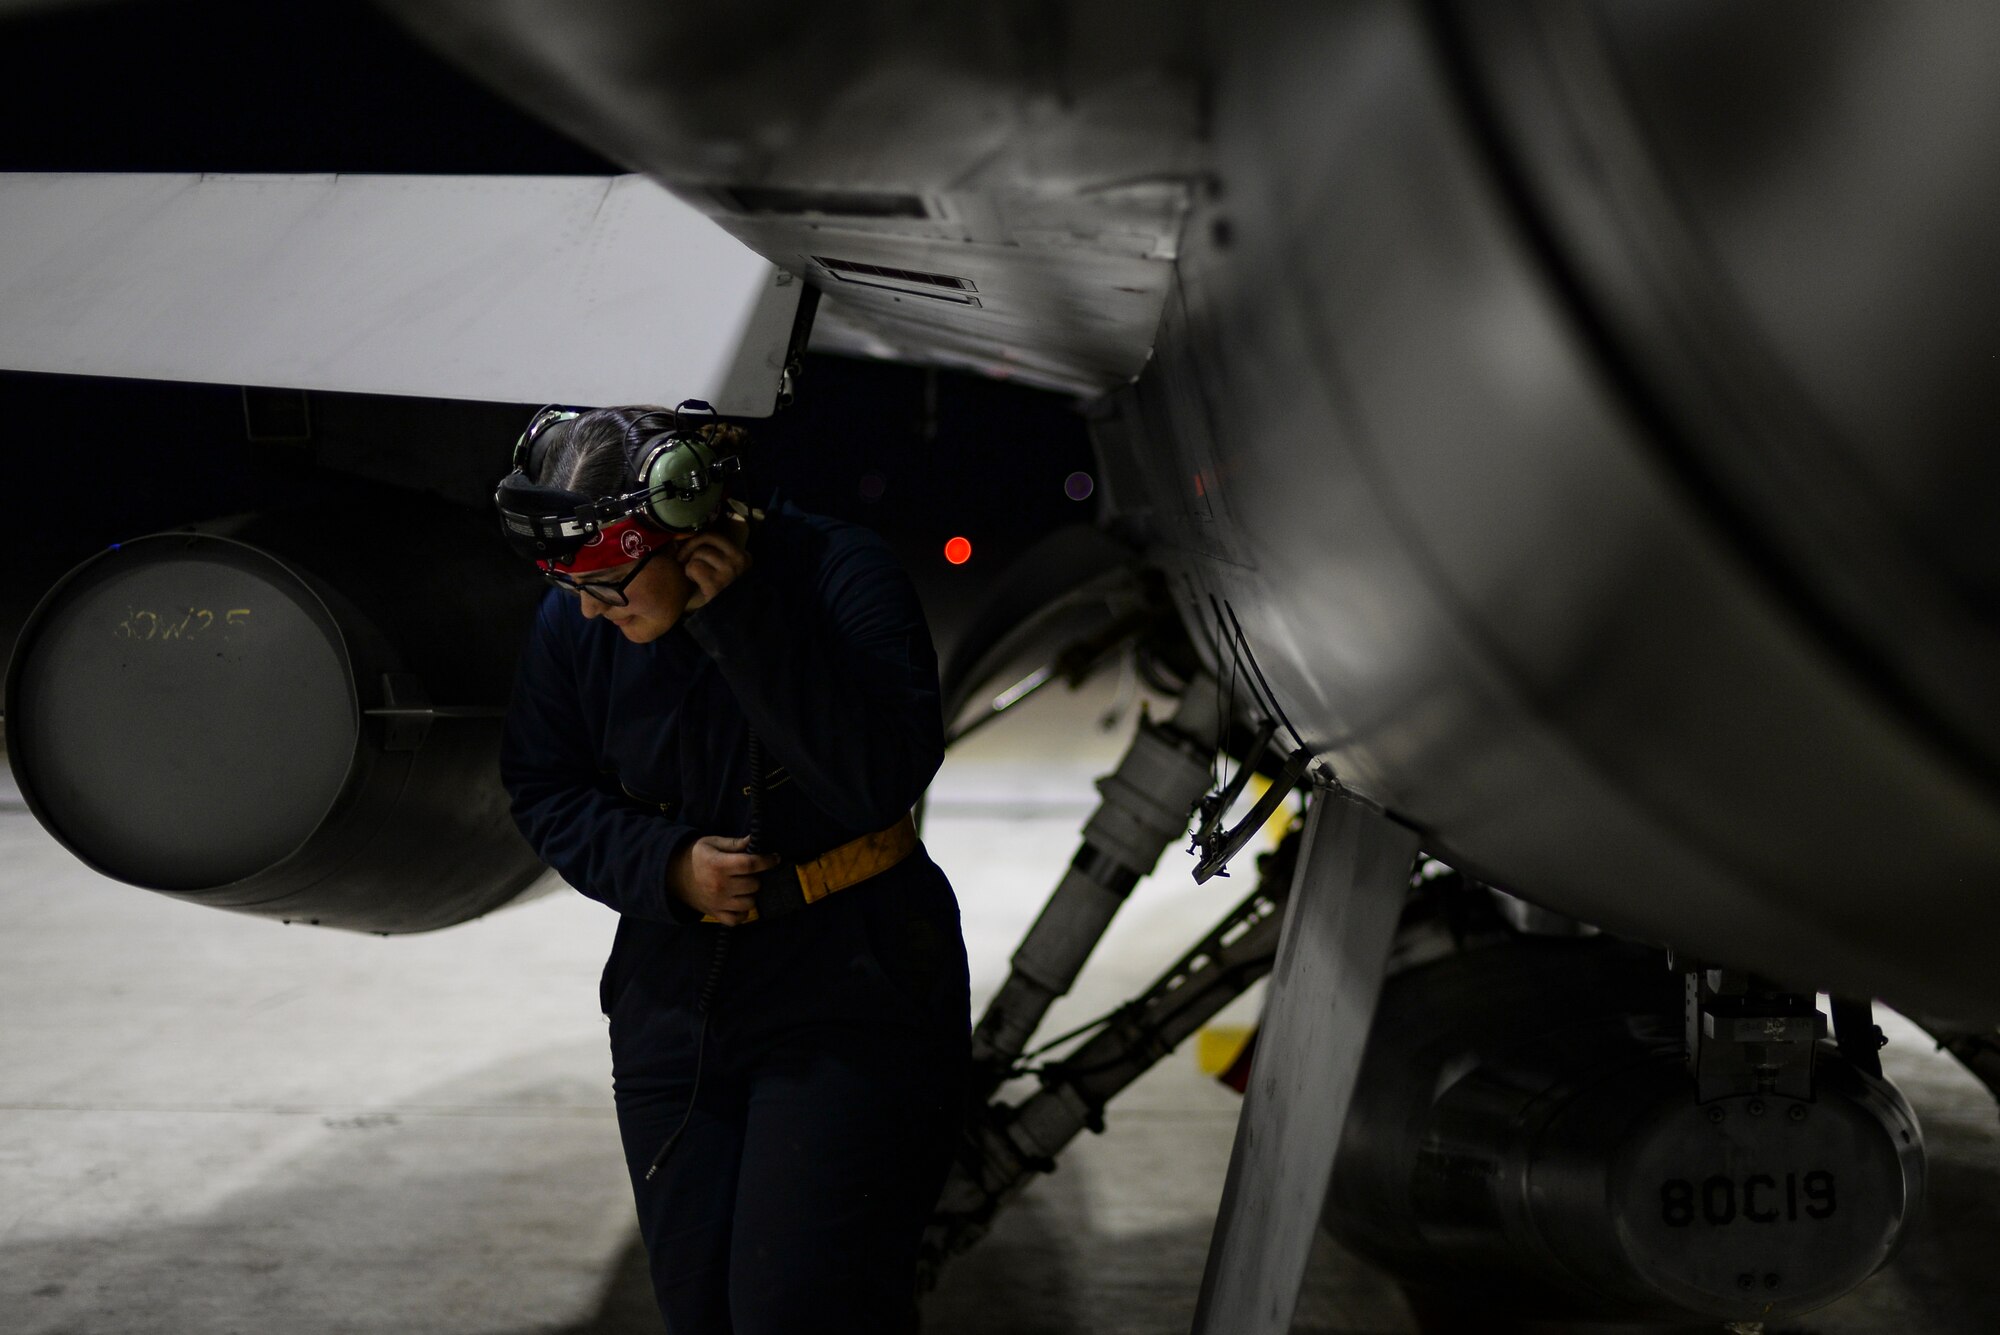 An Airman performs an inspection on a jet.